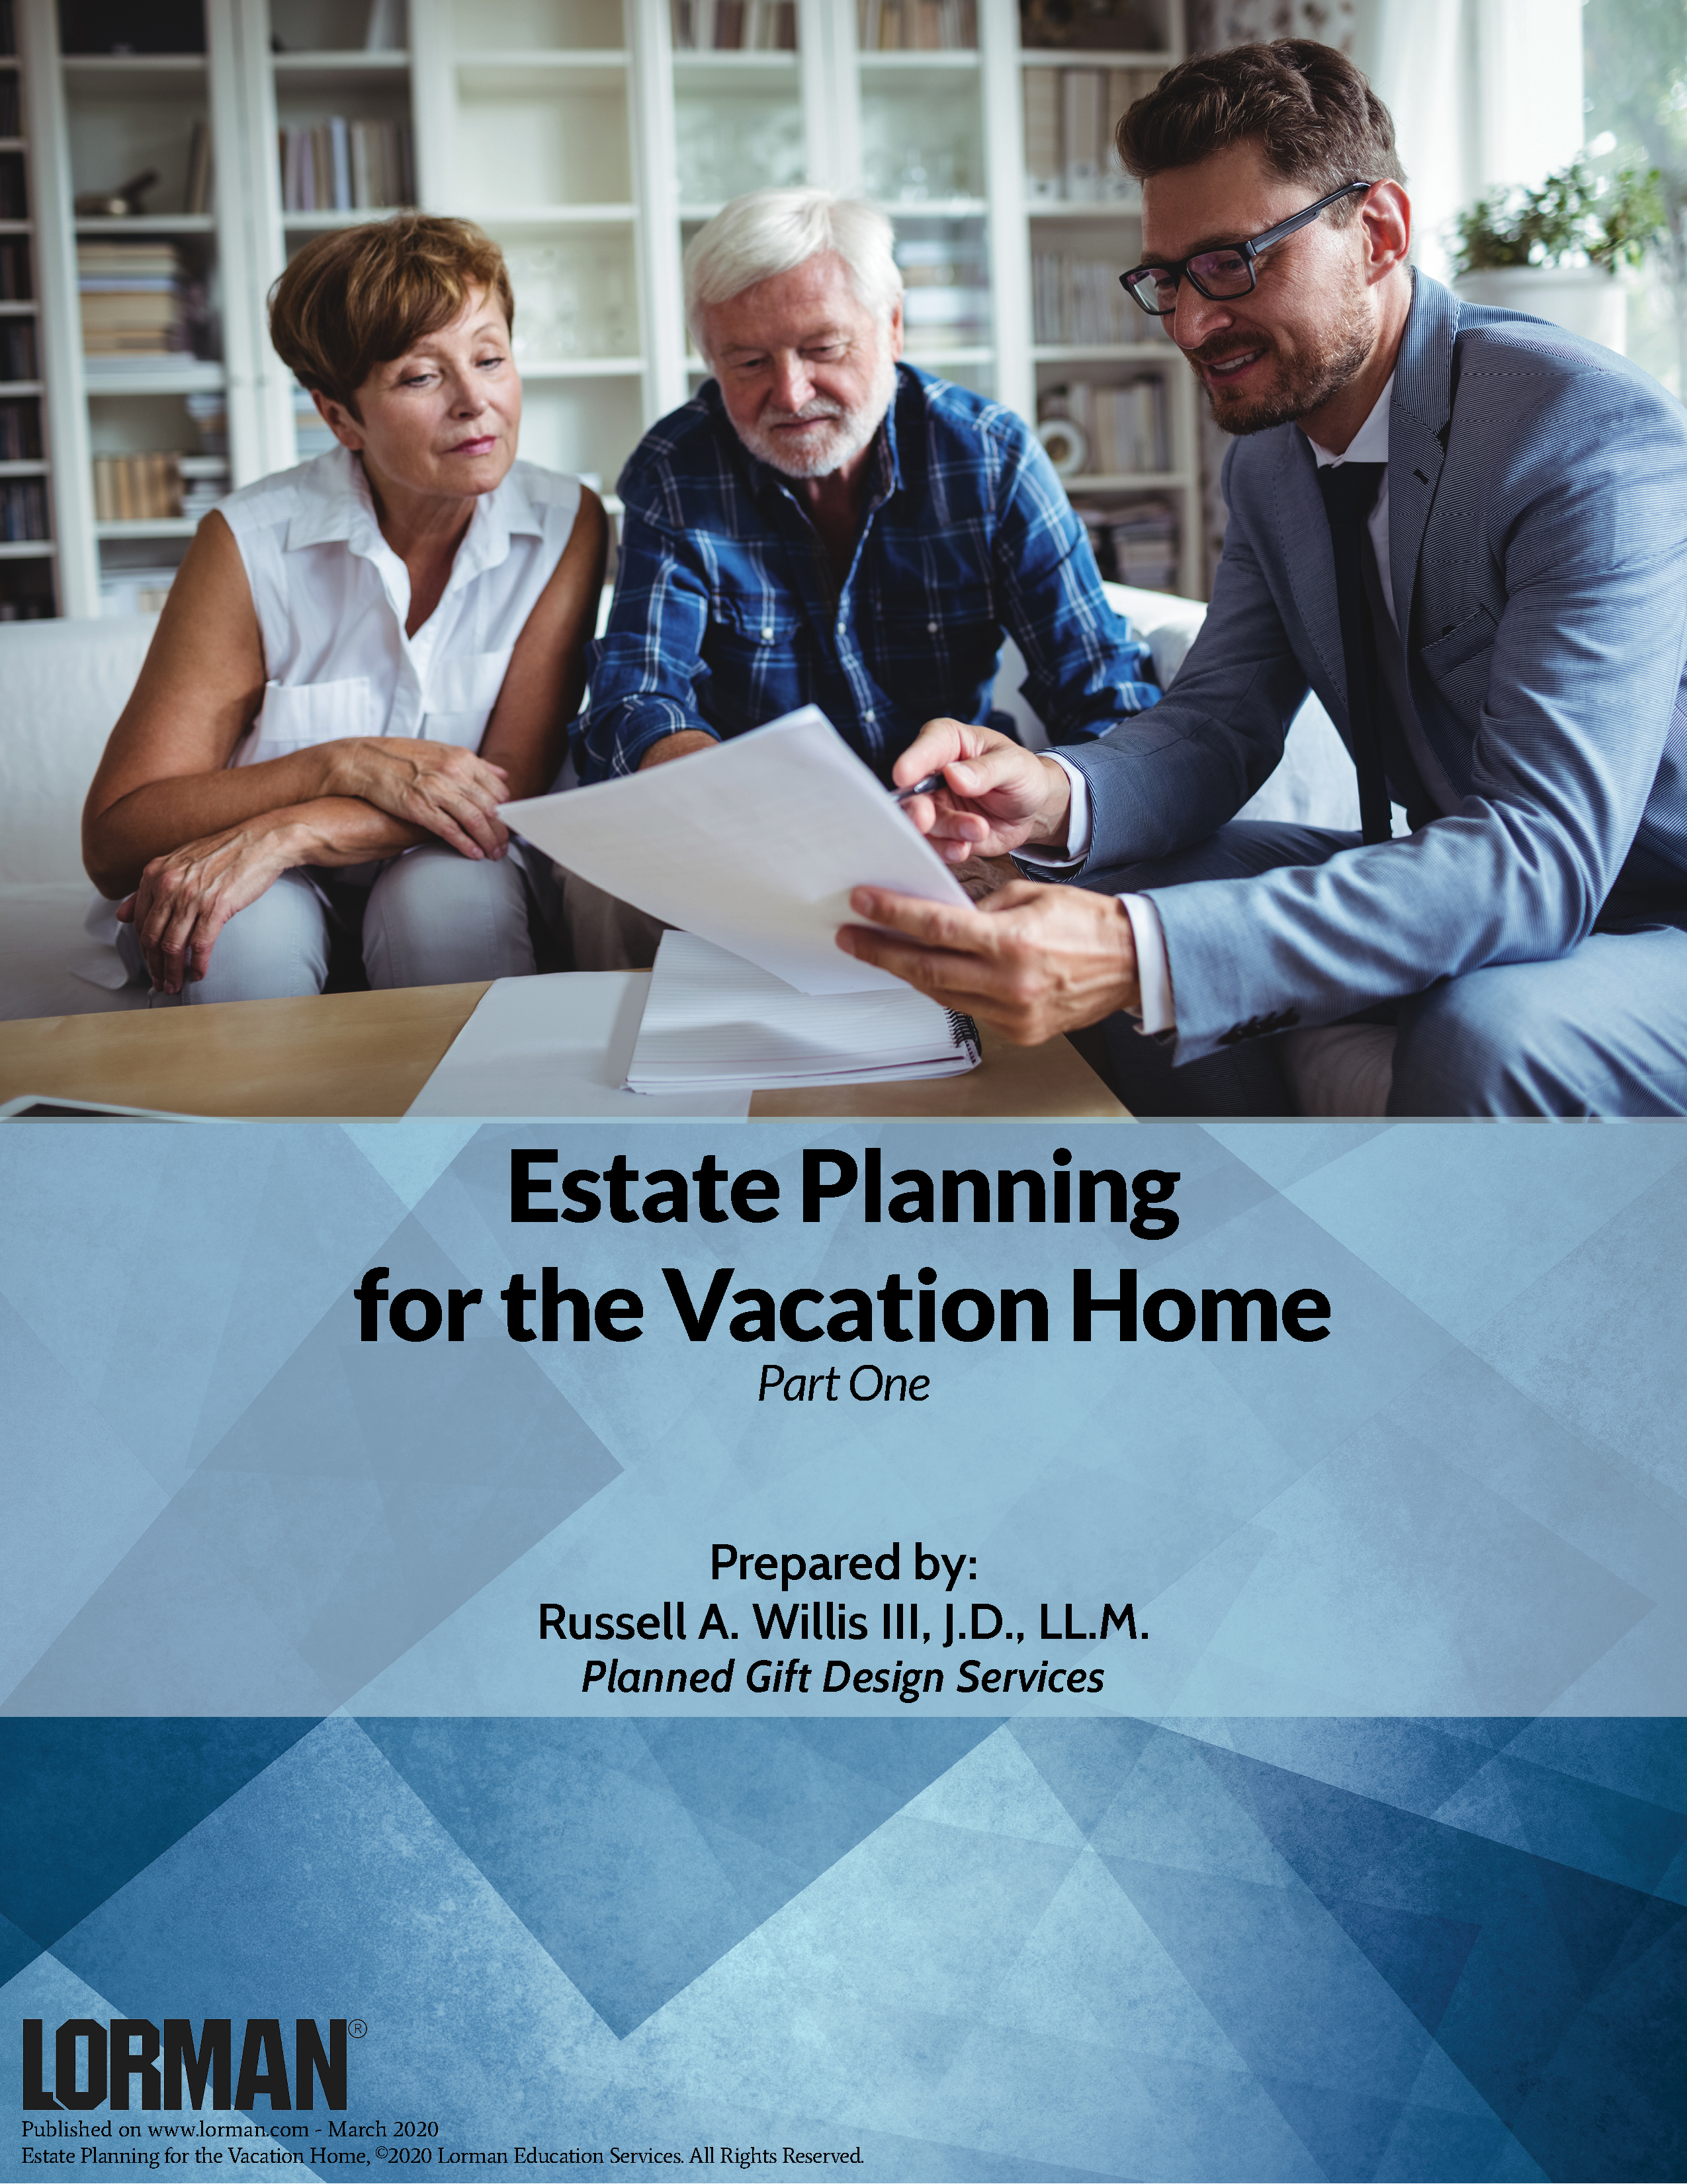 Estate Planning for the Vacation Home